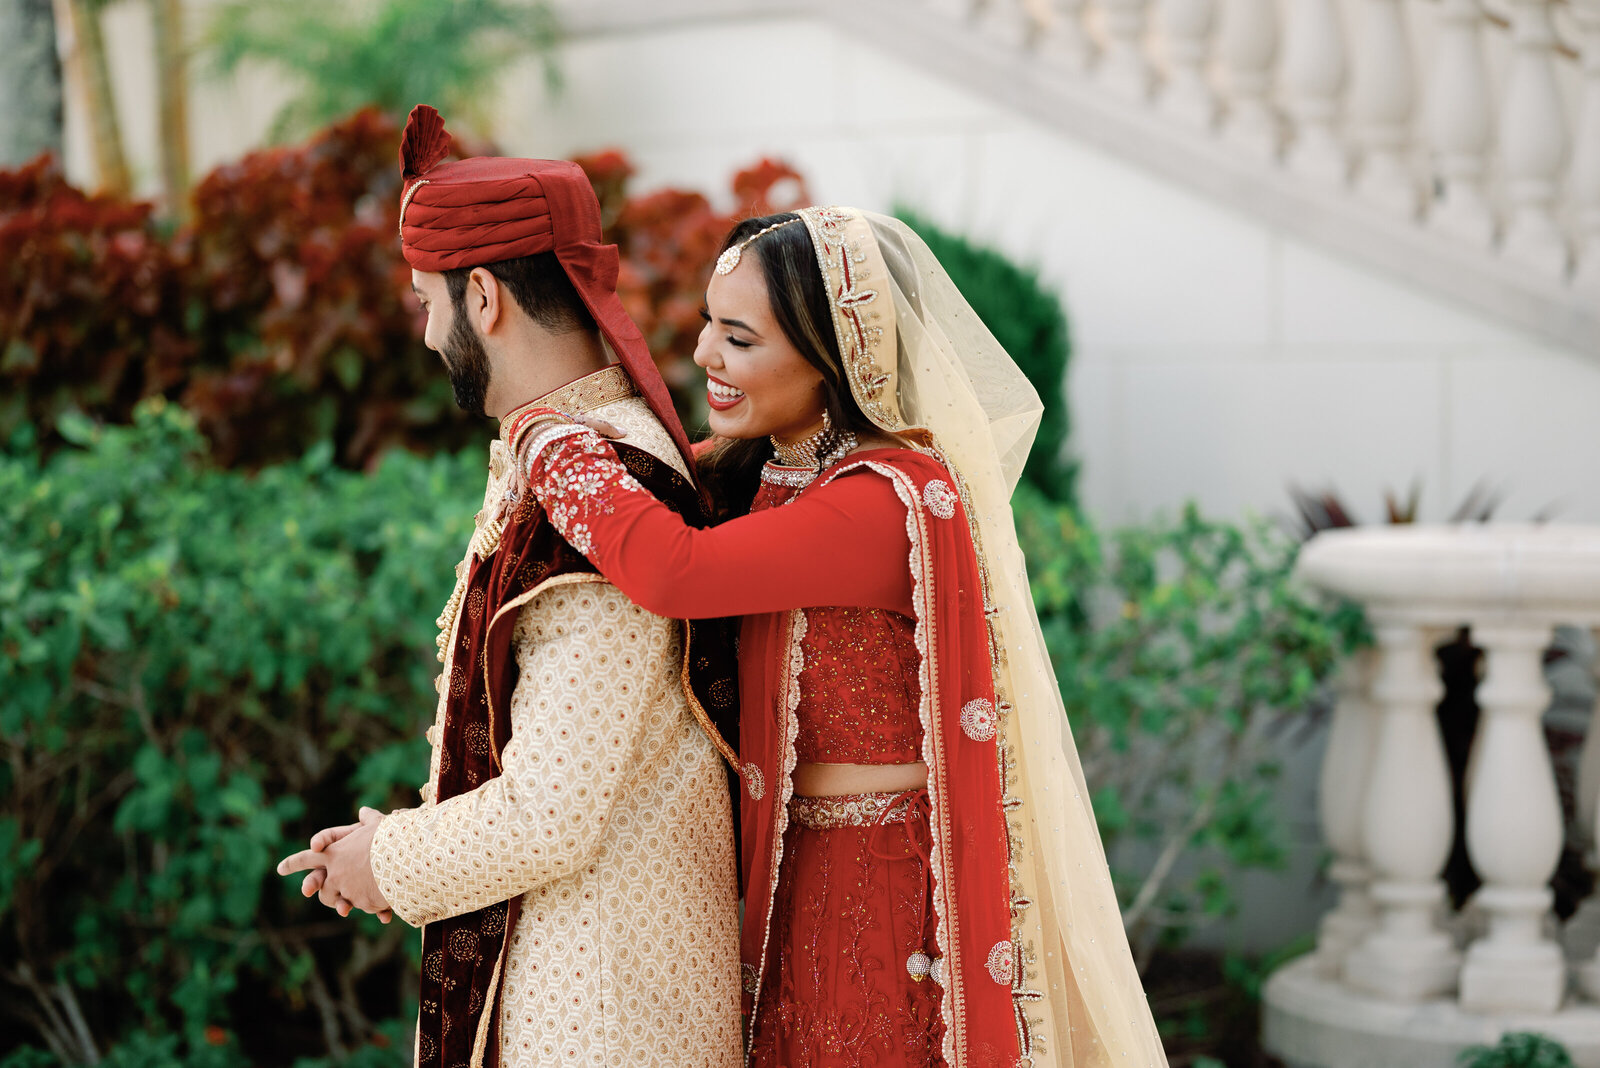 Indian bride hugging her groom from behind at the beginning of their wedding day first look.  She is wearing a traditional red sari.